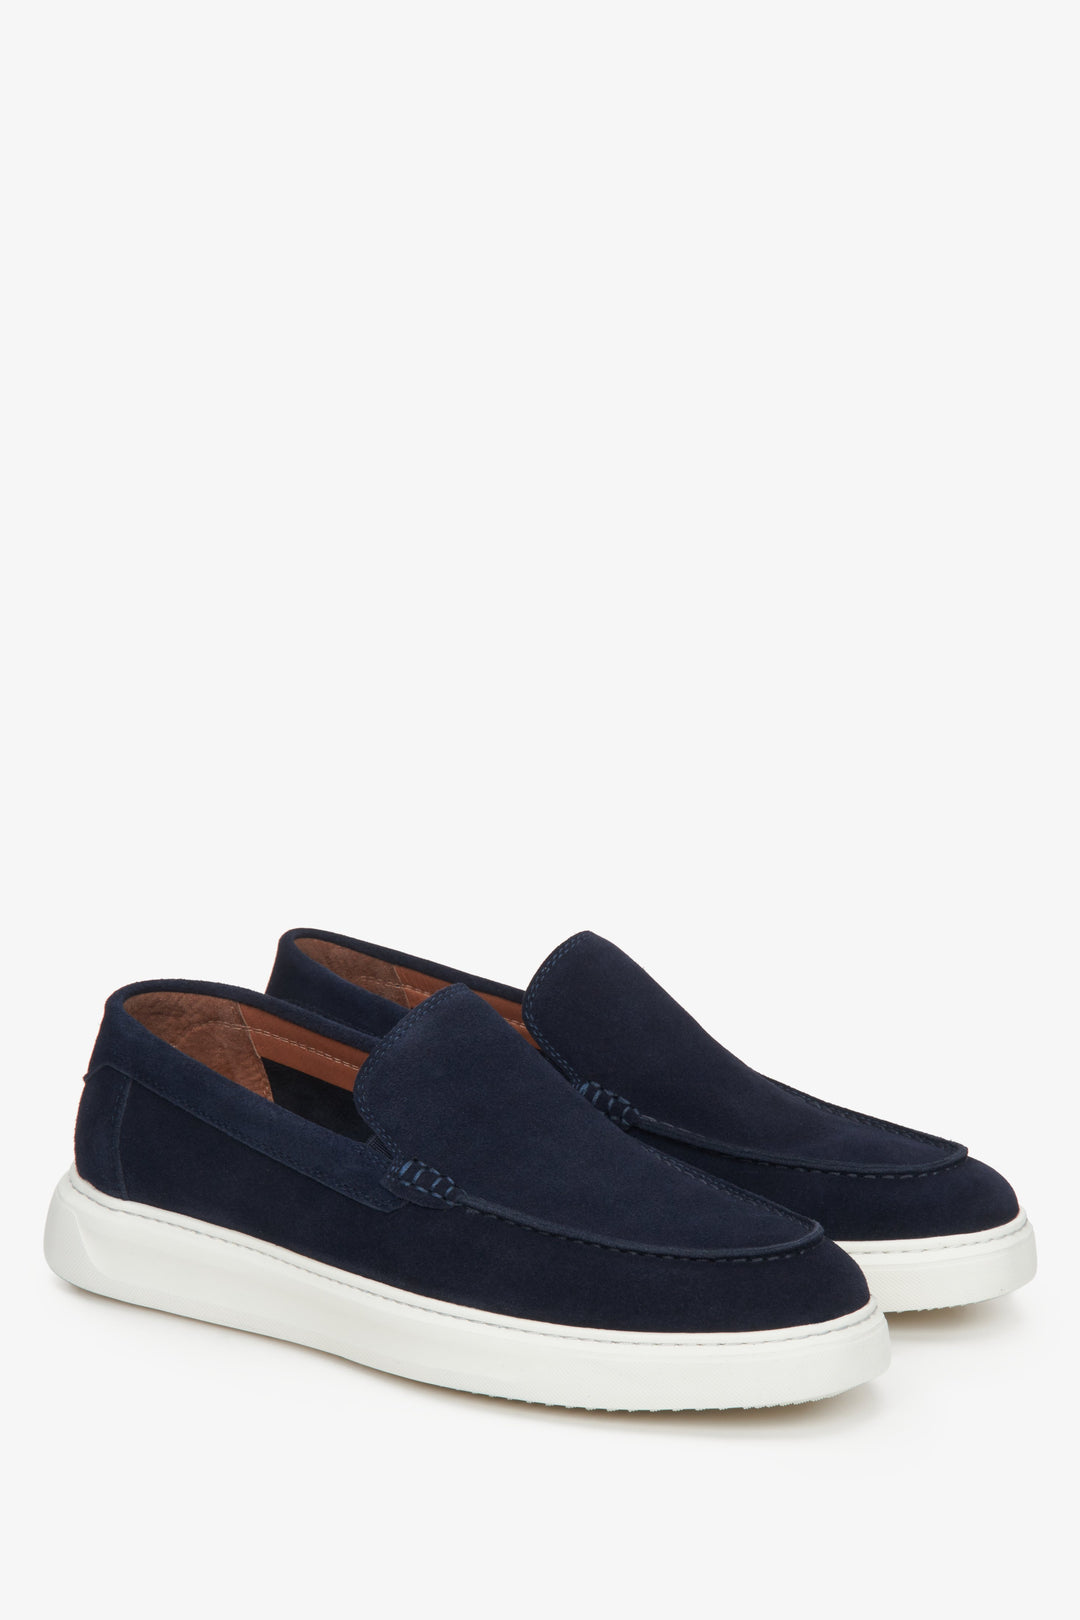 Velour men's loafers in navy blue for spring/fall - presentation of the toe and side seam of the shoe.